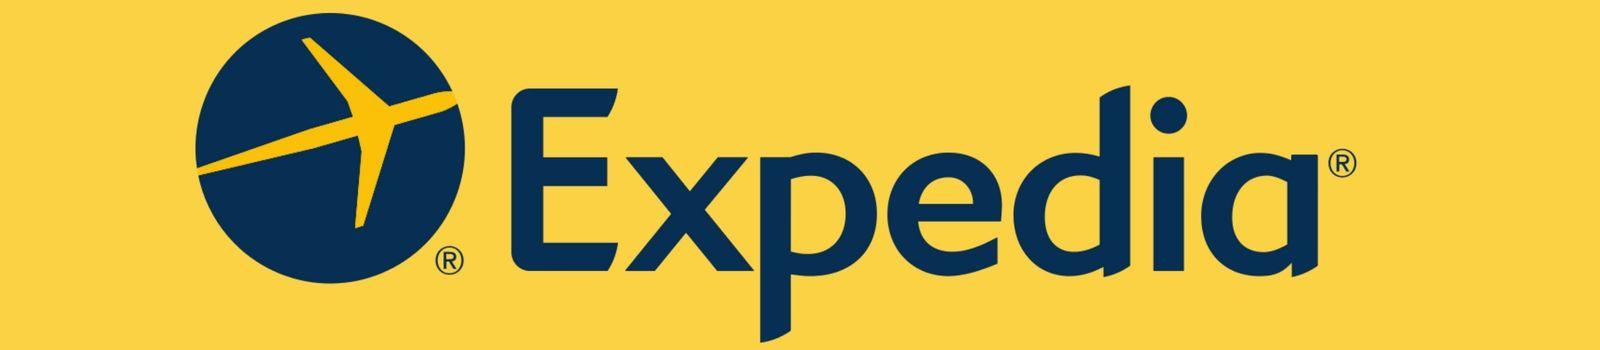 Expedia Plane Logo - Expedia Flight Deals in 2019 Updated Weekly